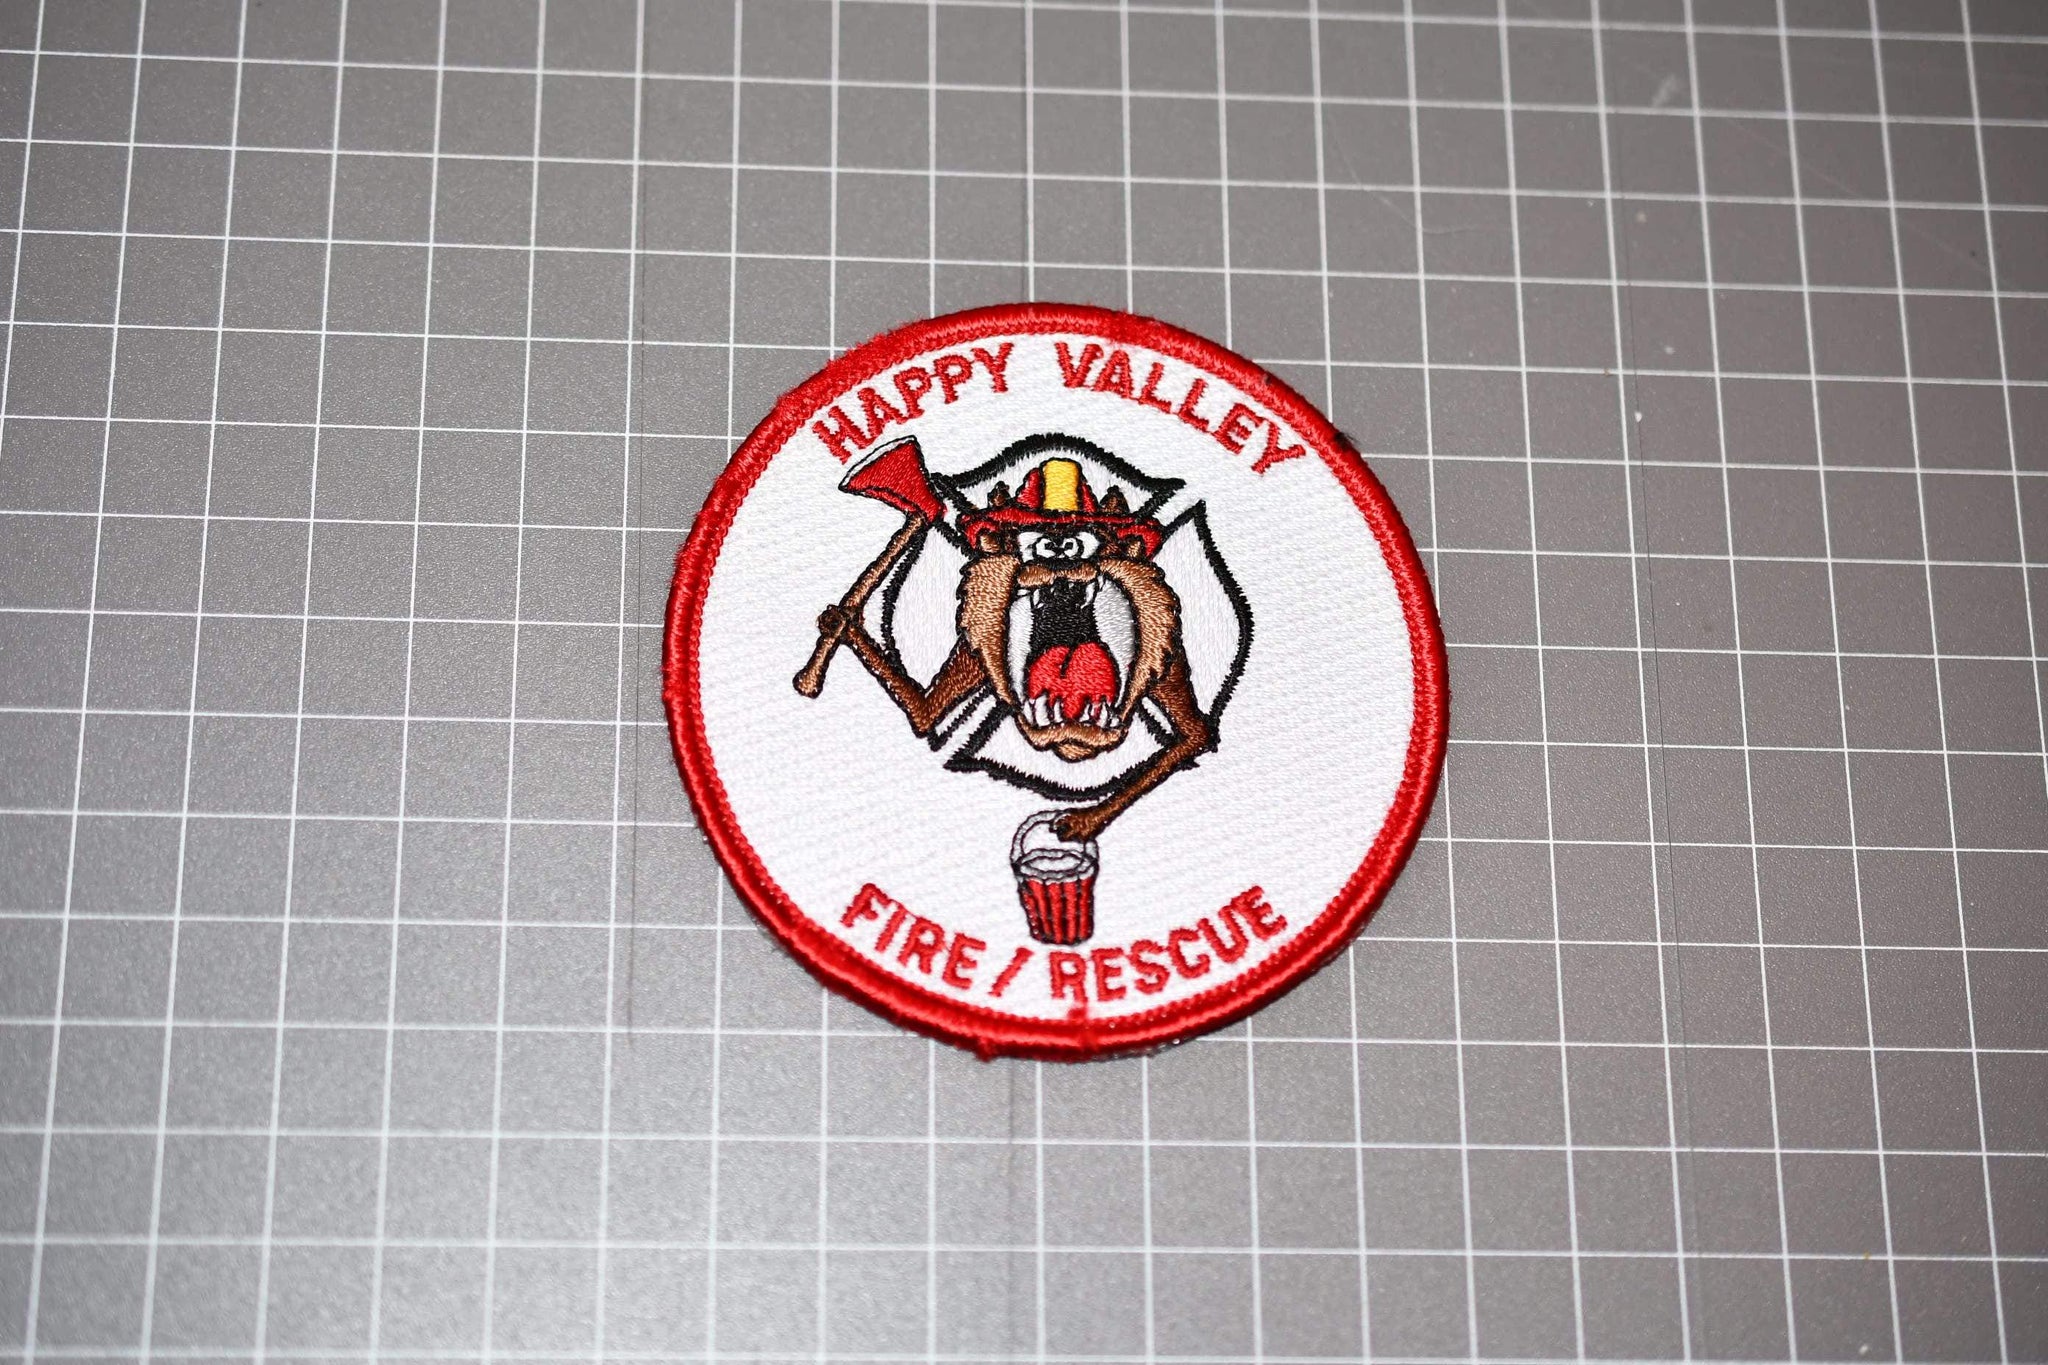 Happy Valley Fire / Rescue Patch (U.S. Fire Patches)